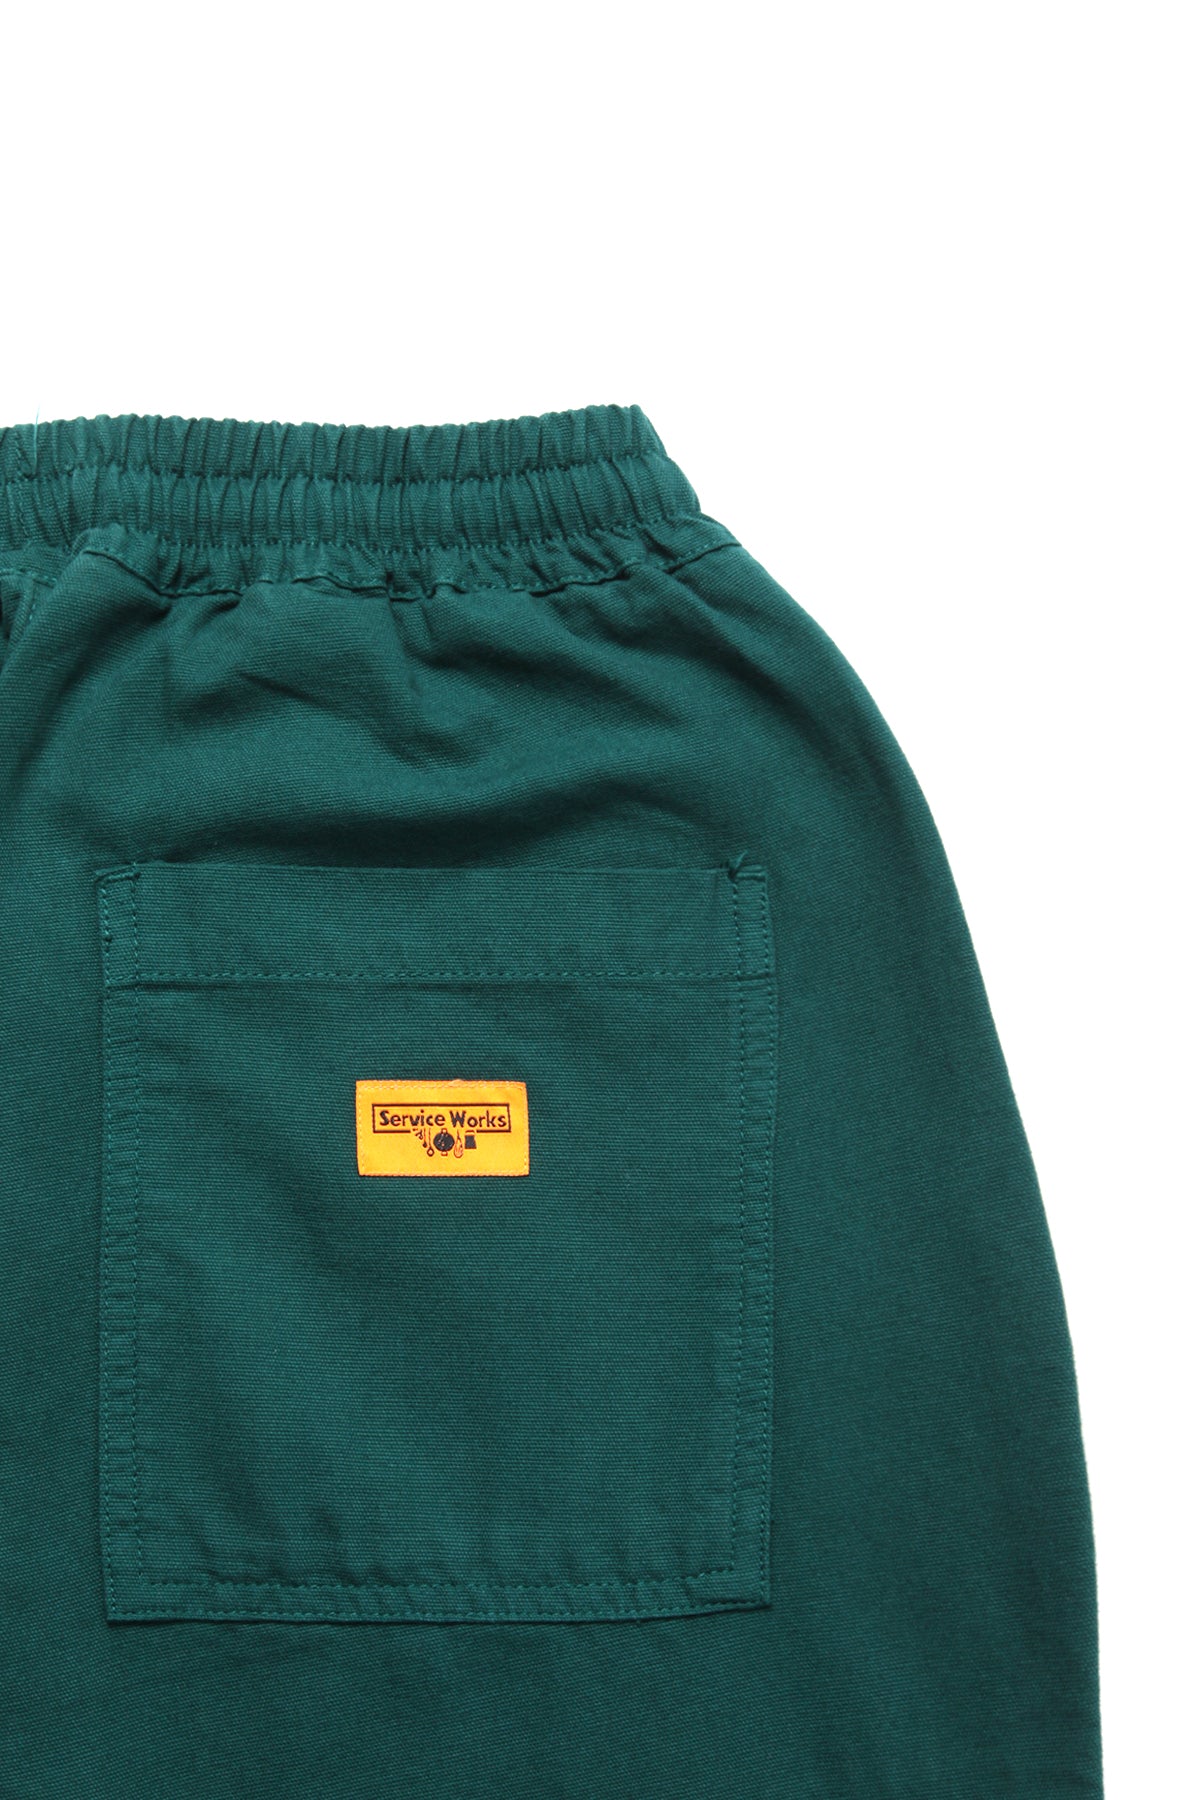 Service Works - Classic Chef Pants - Teal